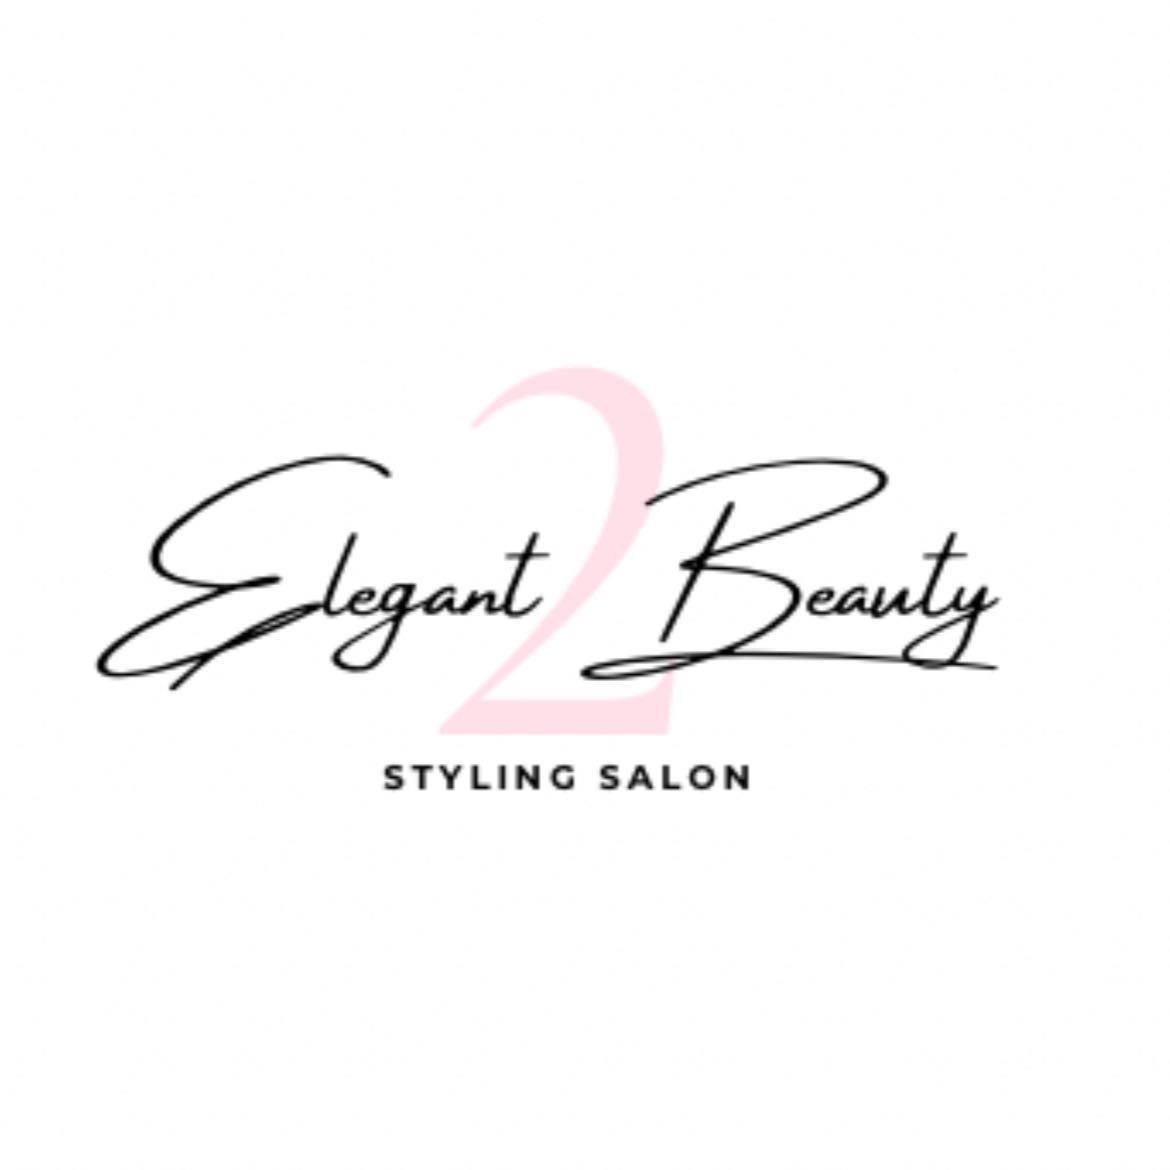 Elegant Beauty 2, 961 W Ray Rd, Suite 9, Chandler, 85225